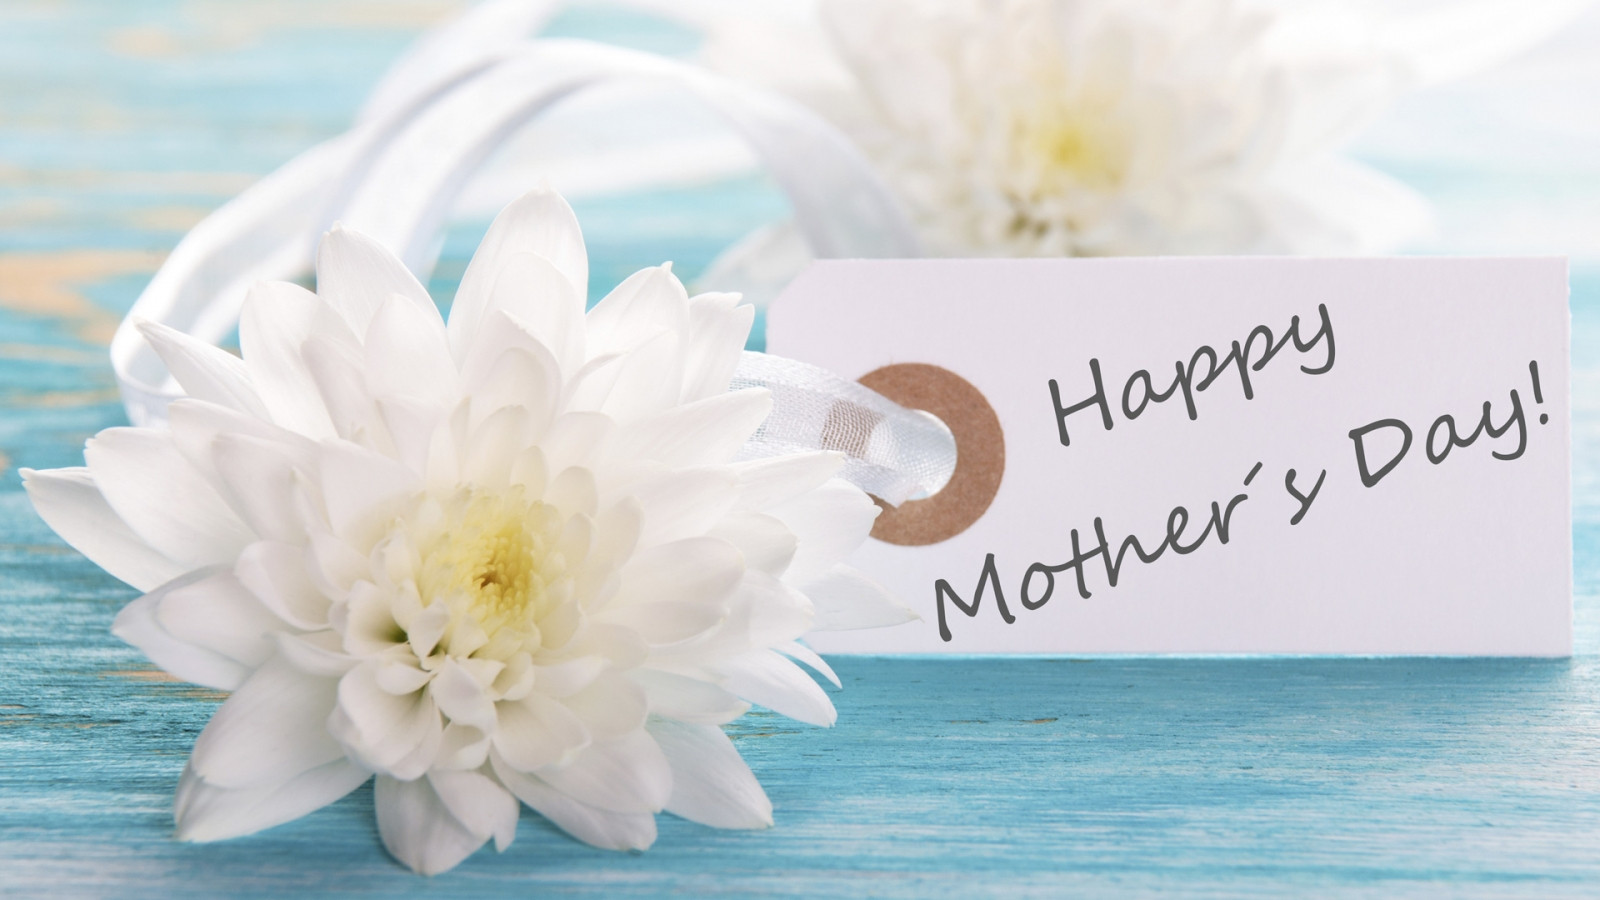 Mothers Day Gift 2015
 Mother s Day 2015 Last minute t ideas from Chanel No 5